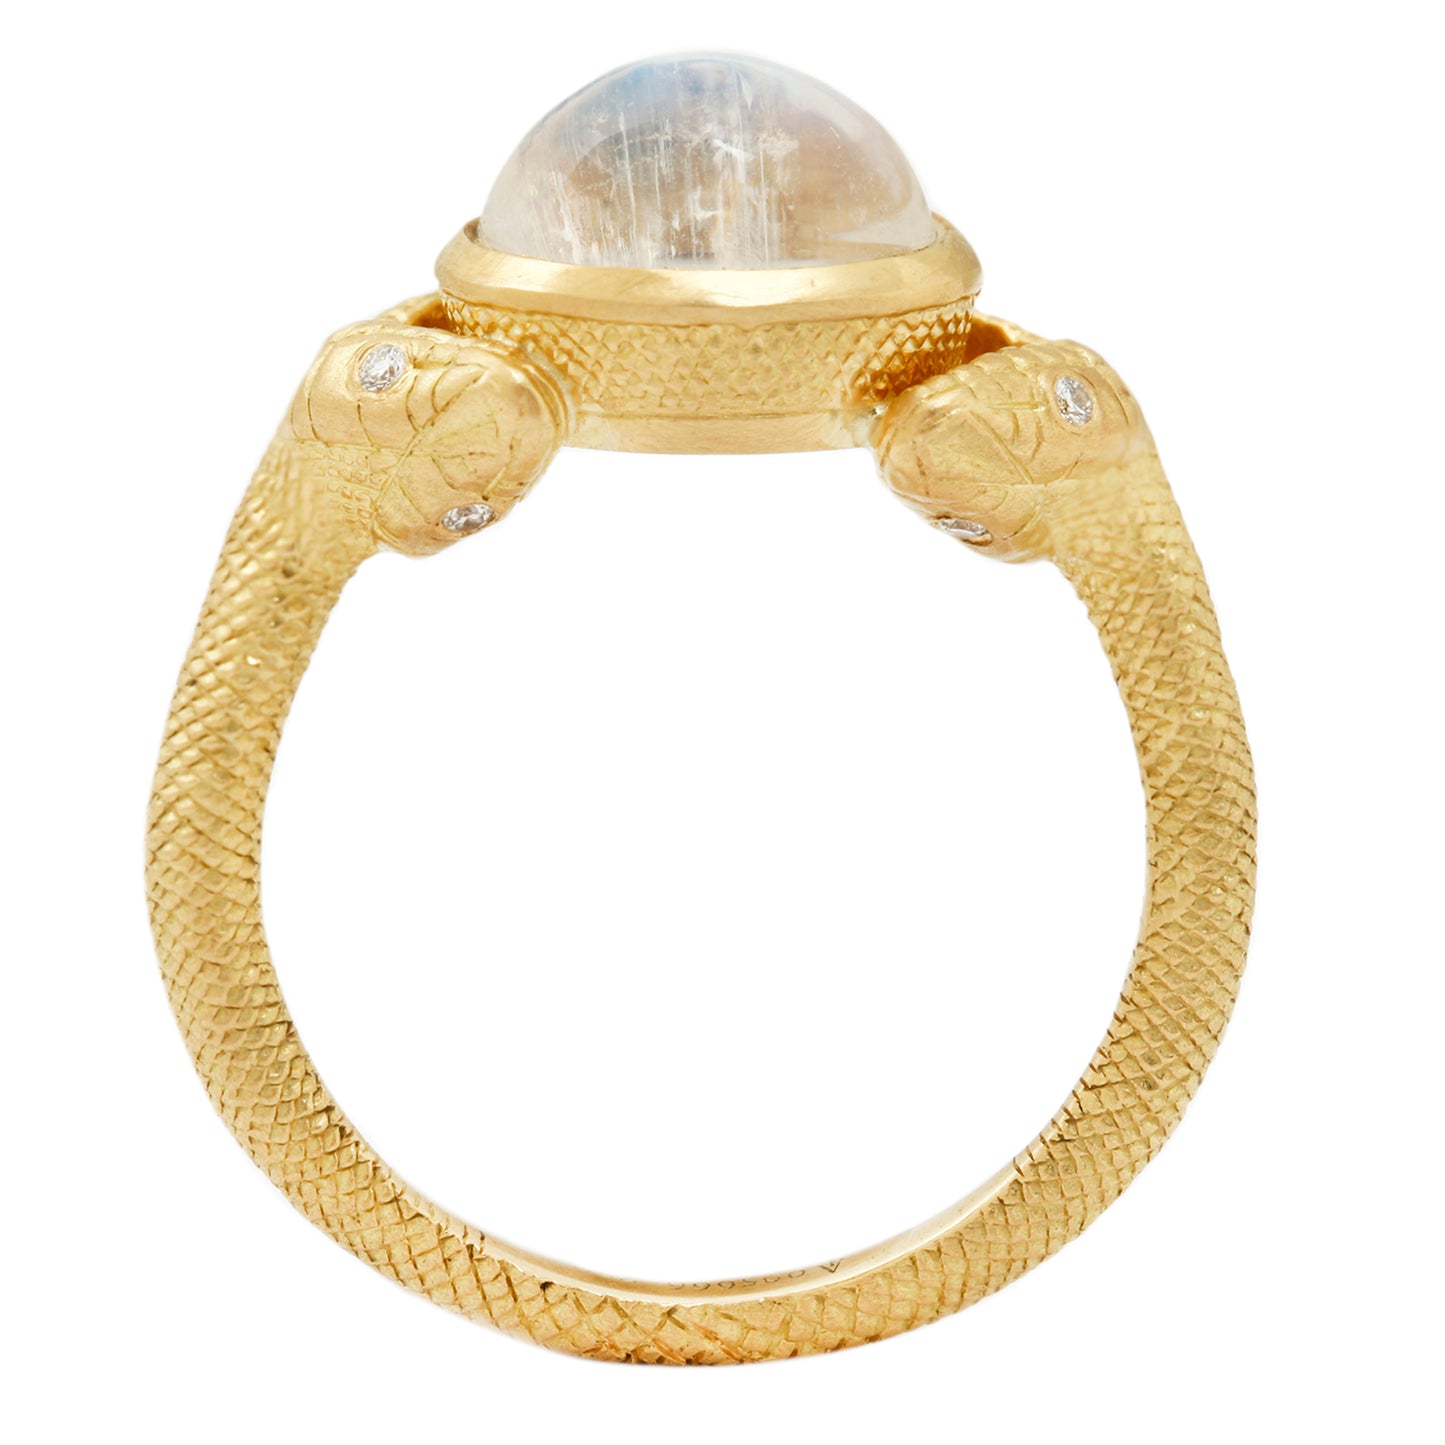 Double Headed Moonstone Serpent Ring